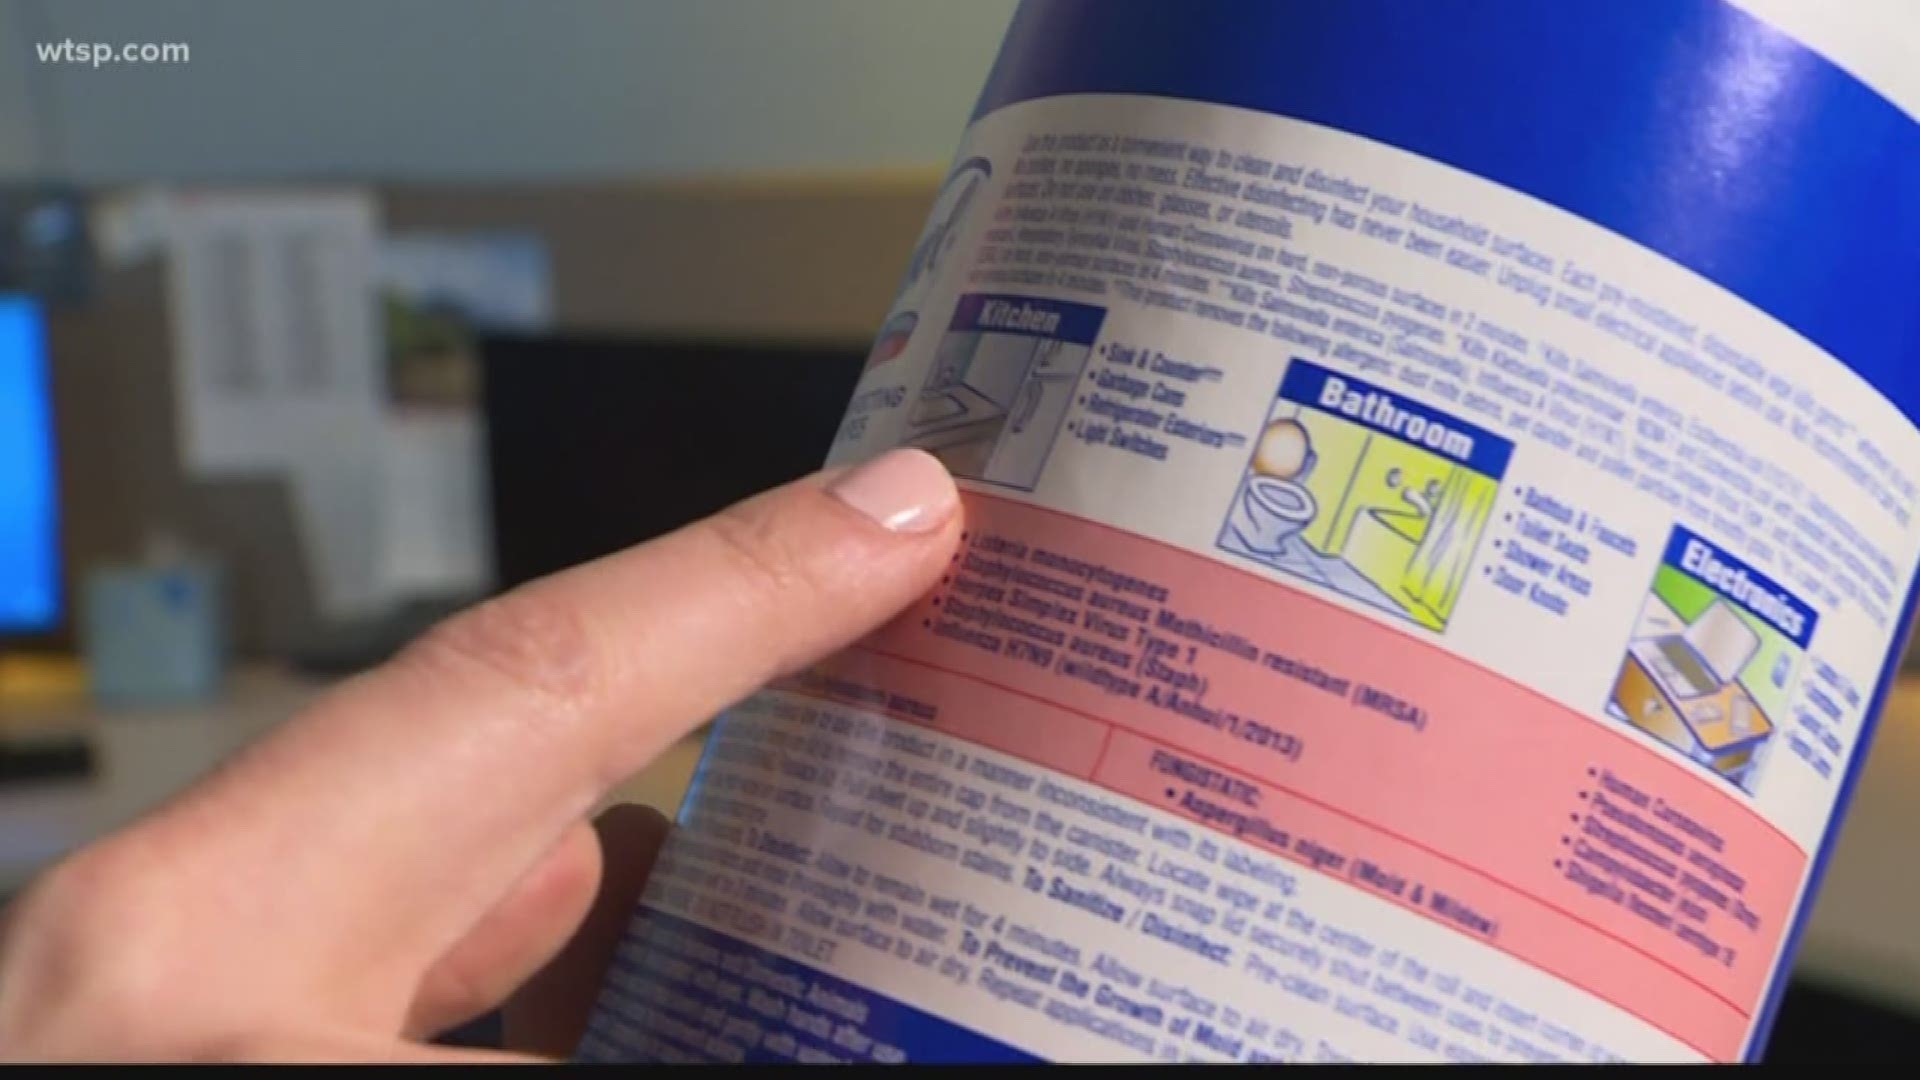 Before you clean and disinfect, read a product’s label to make sure you’re using it properly and effectively.